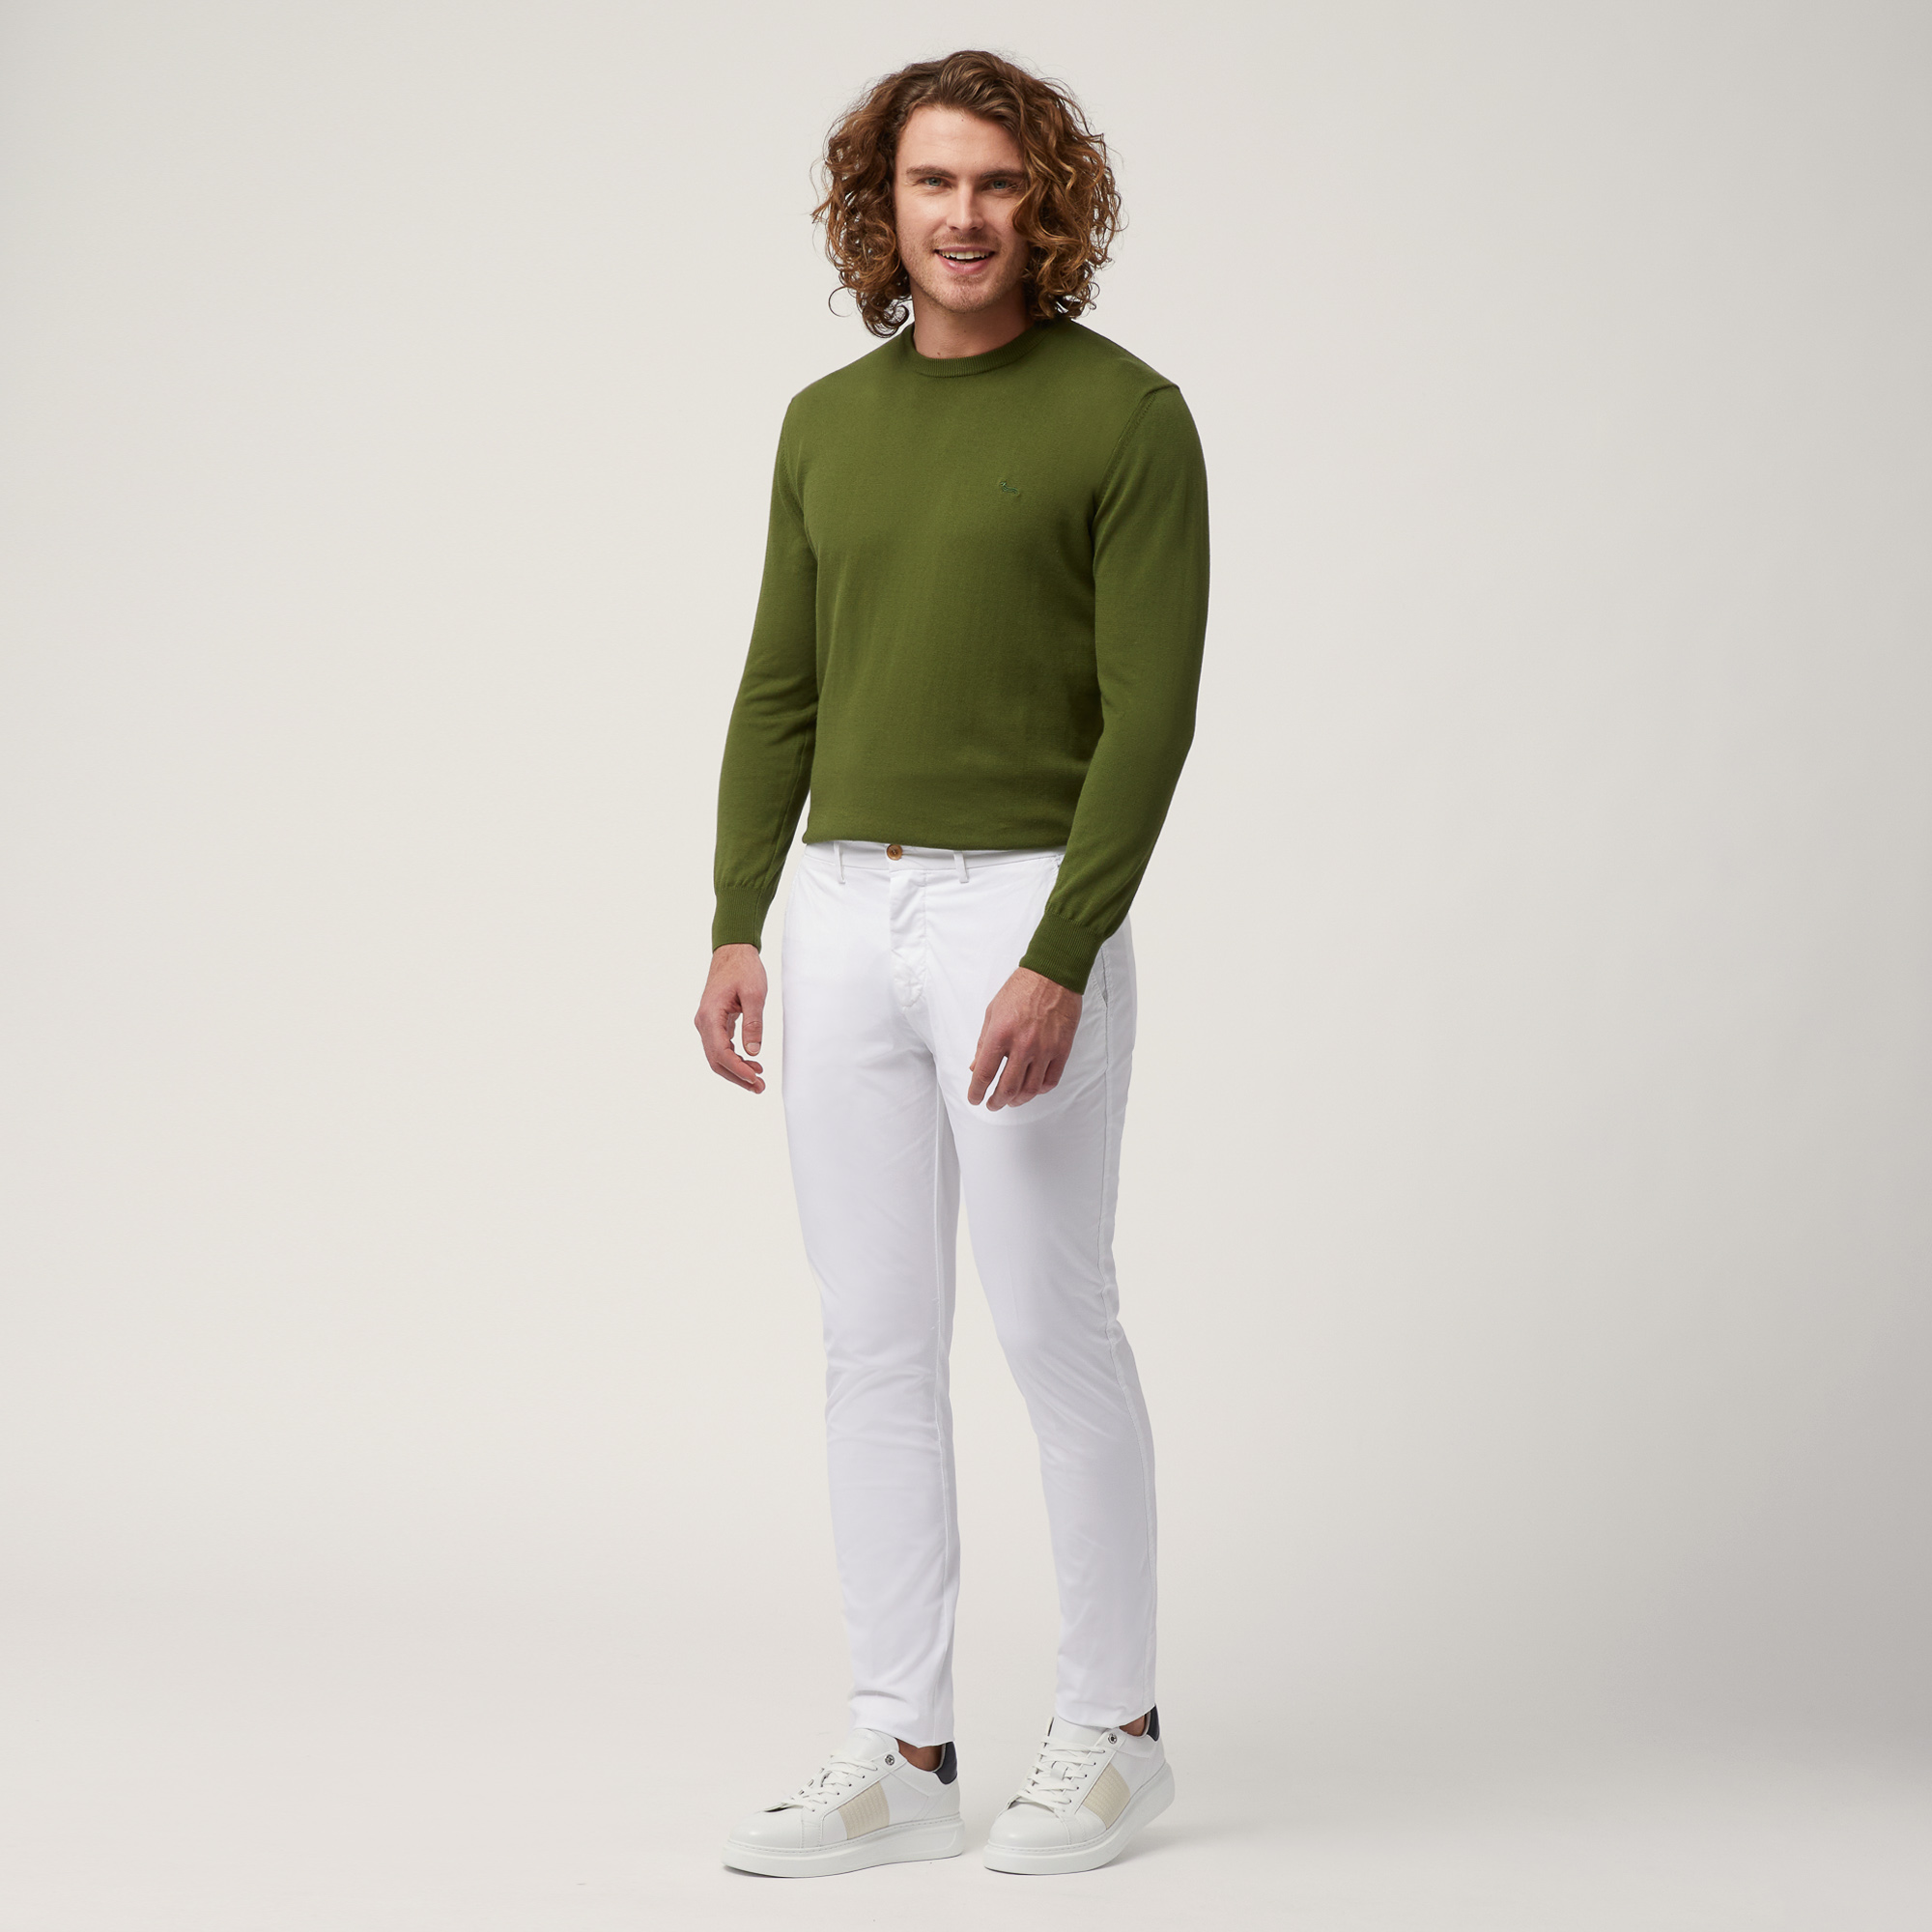 Narrow Fit Chino Pants, White, large image number 3